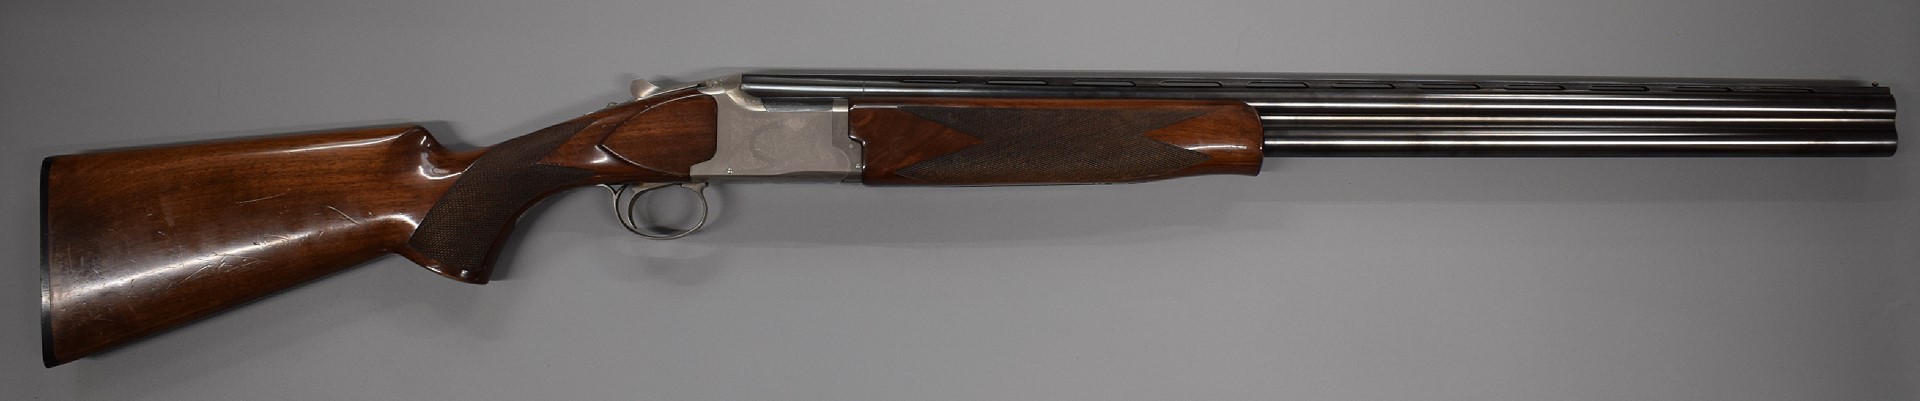 Winchester 5000 Field 12 bore over and under shotgun with engraved locks and trigger guard, single - Image 2 of 8